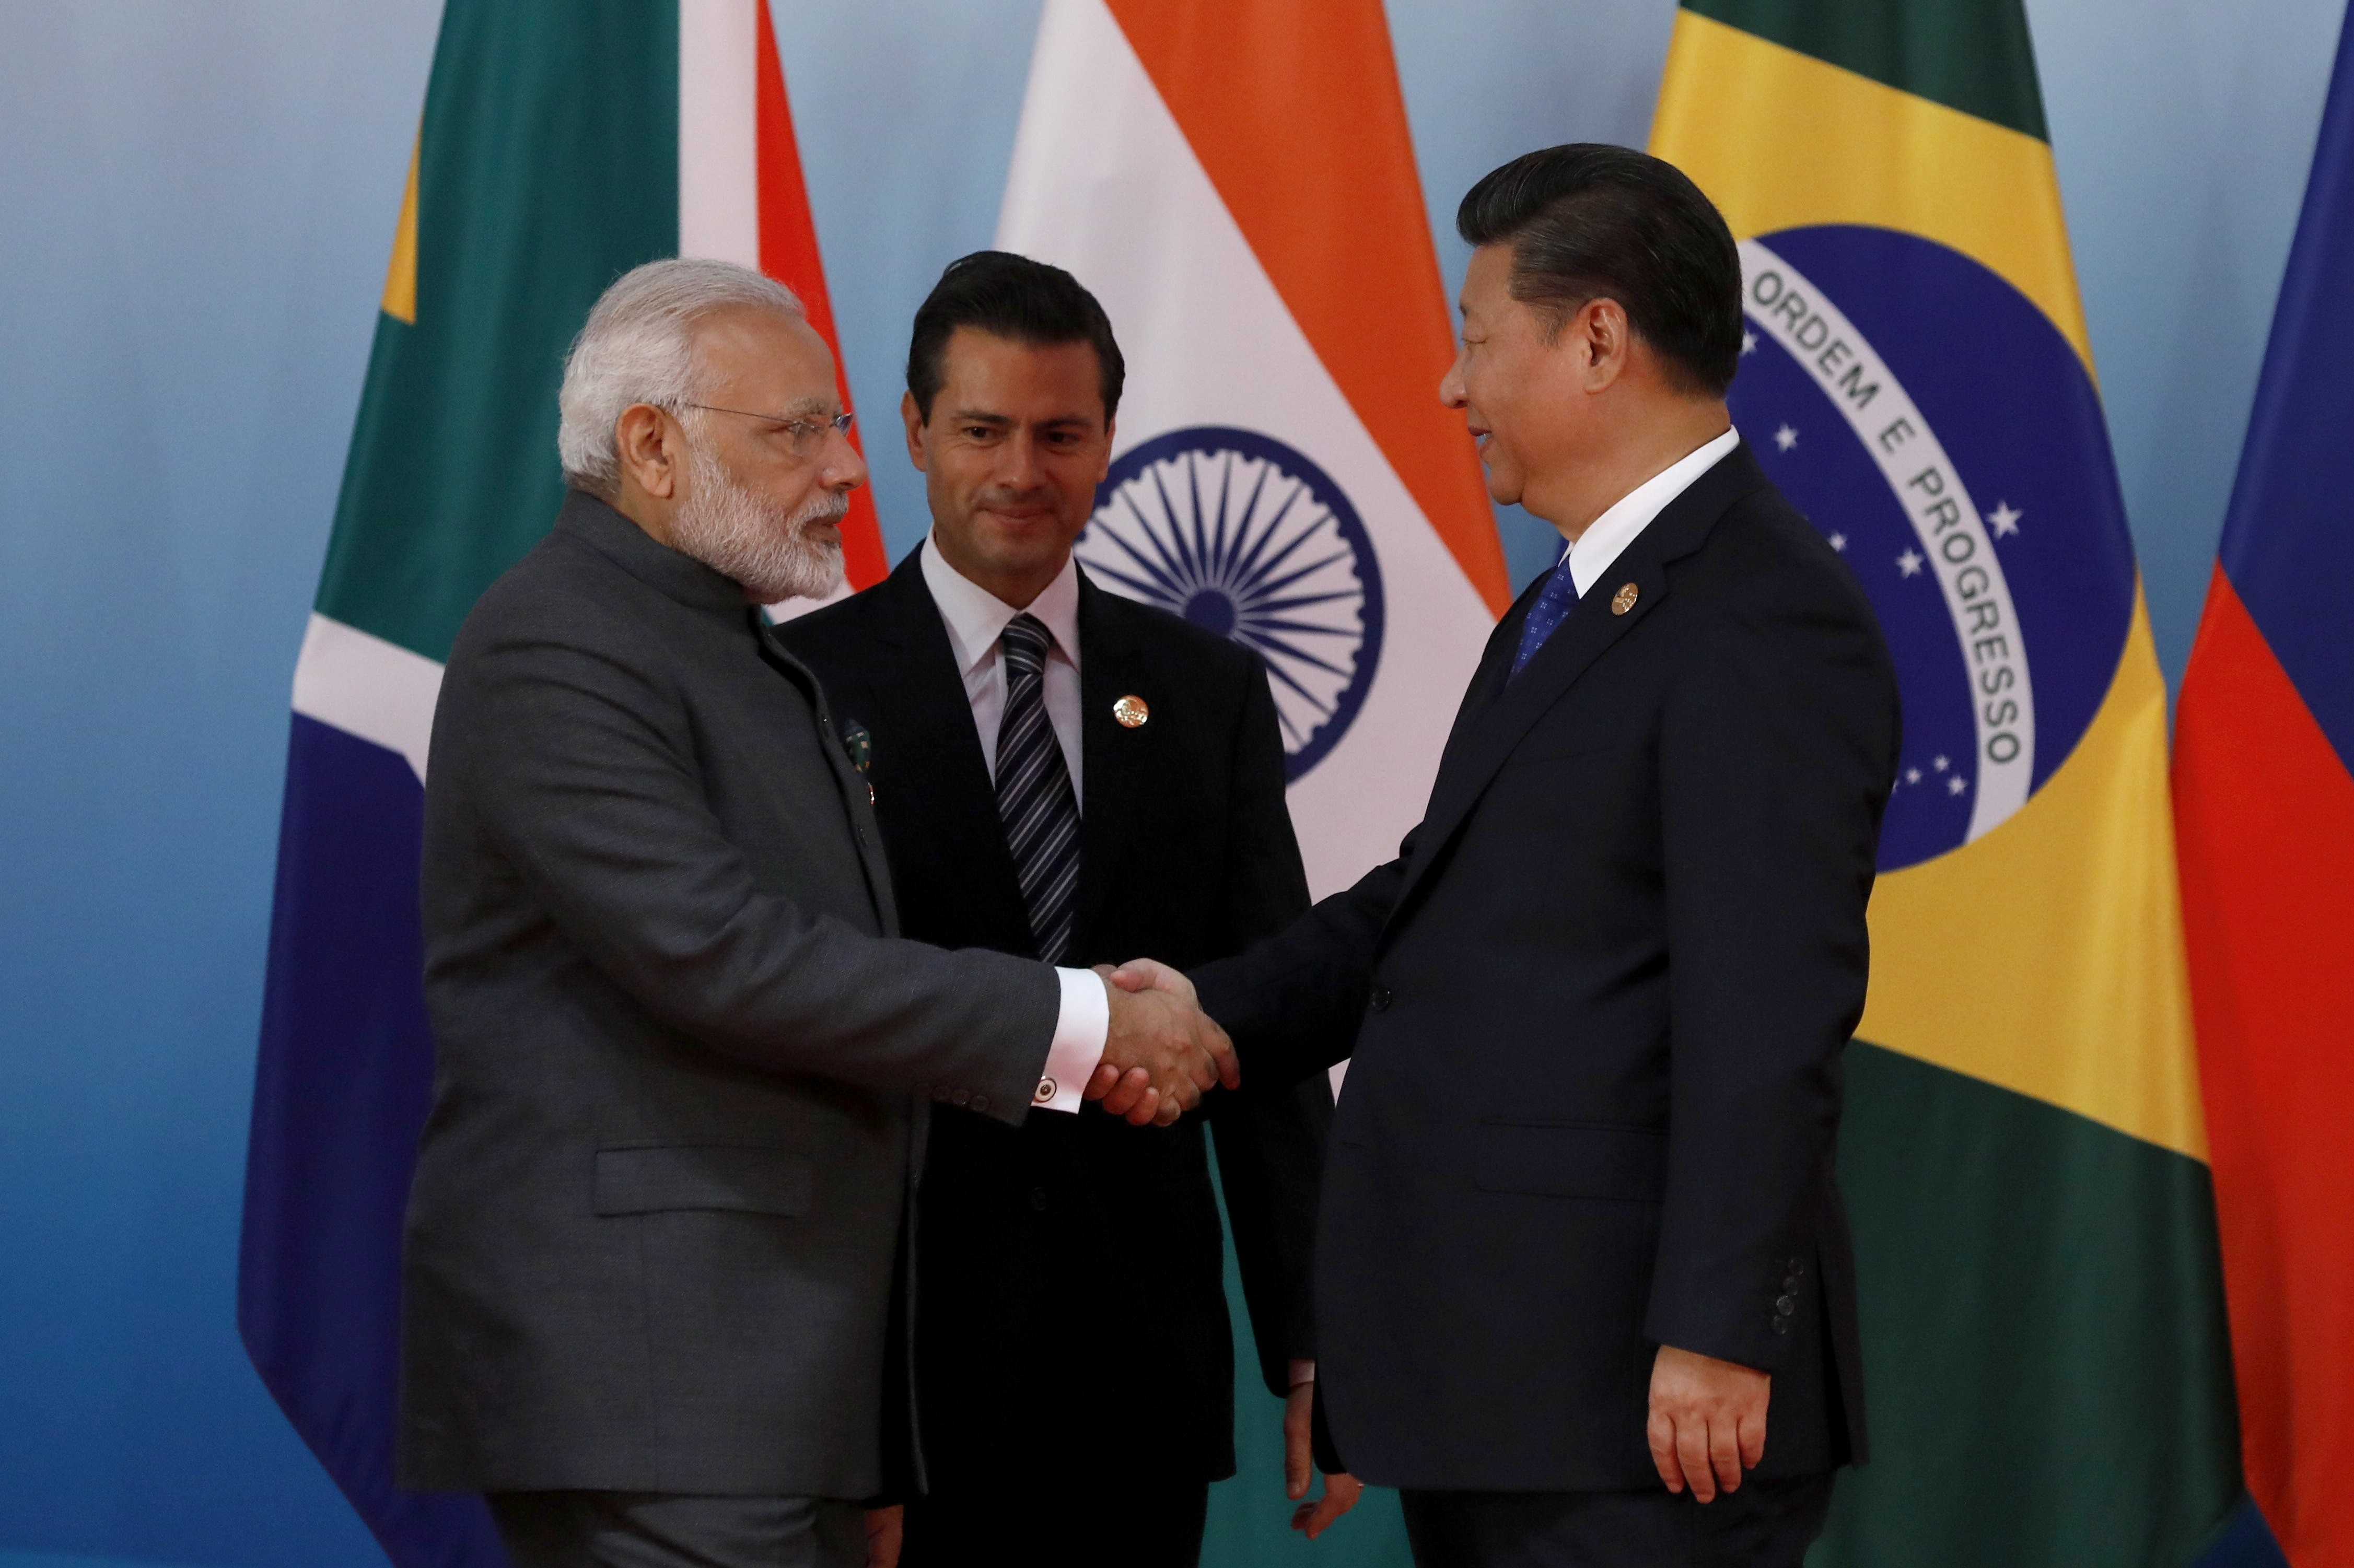 Chinese President Xi Jinping (right) greets Indian Prime Minister Narendra Modi and Mexico's President Enrique Pena Nieto before a group photo session on the sidelines of the 2017 BRICS Summit in Xiamen, China, on September 5. Photo: EPA-EFE